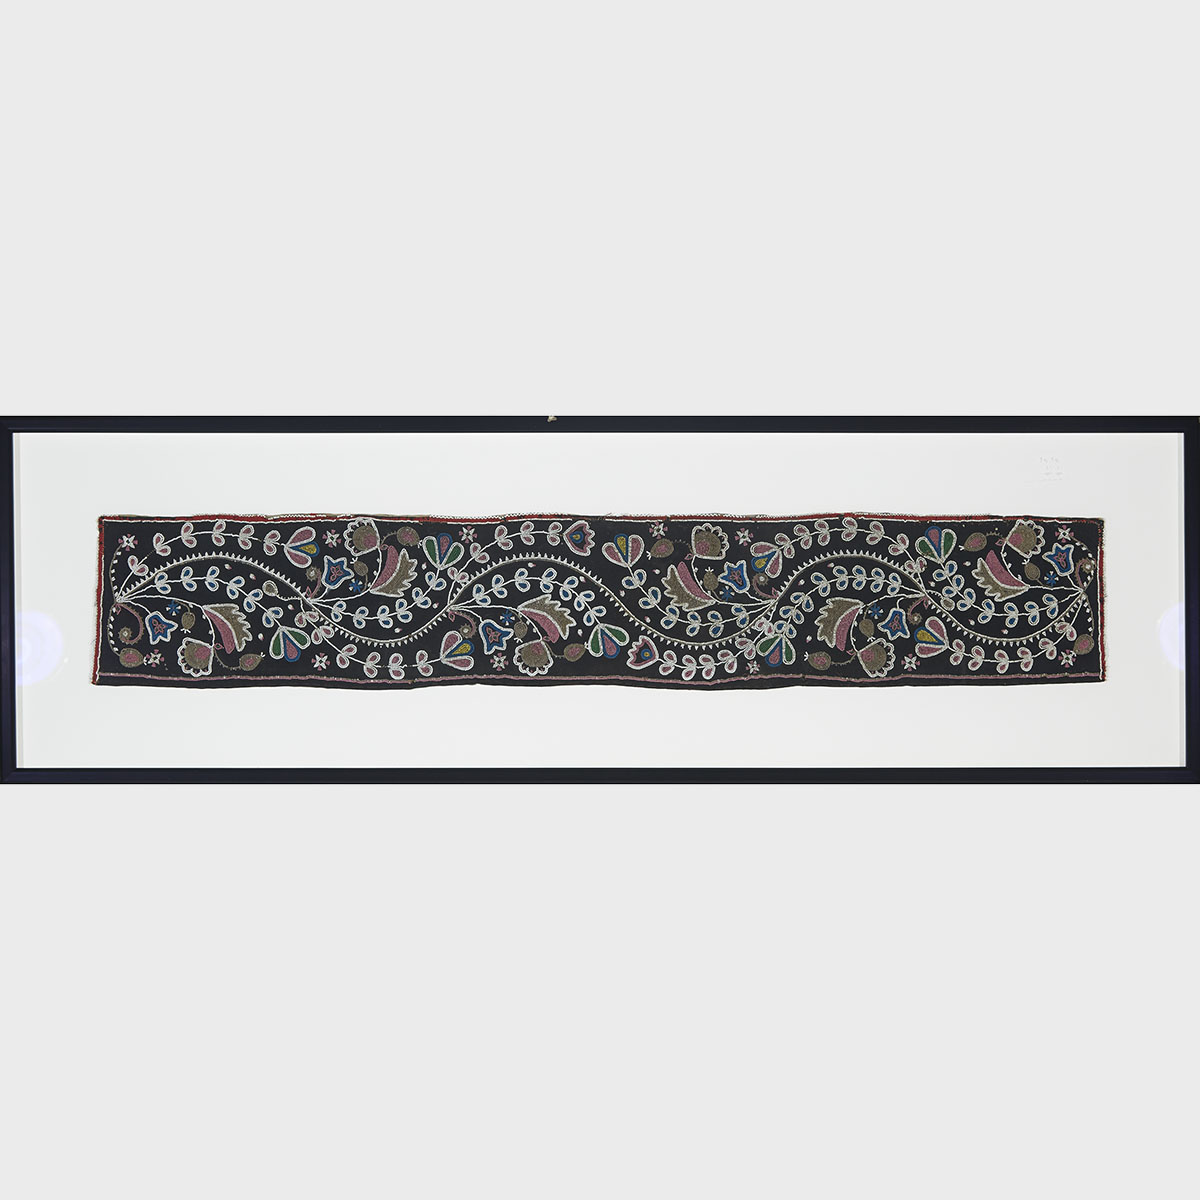 Eastern Woodlands Beaded Cloth Panel, late 19th century